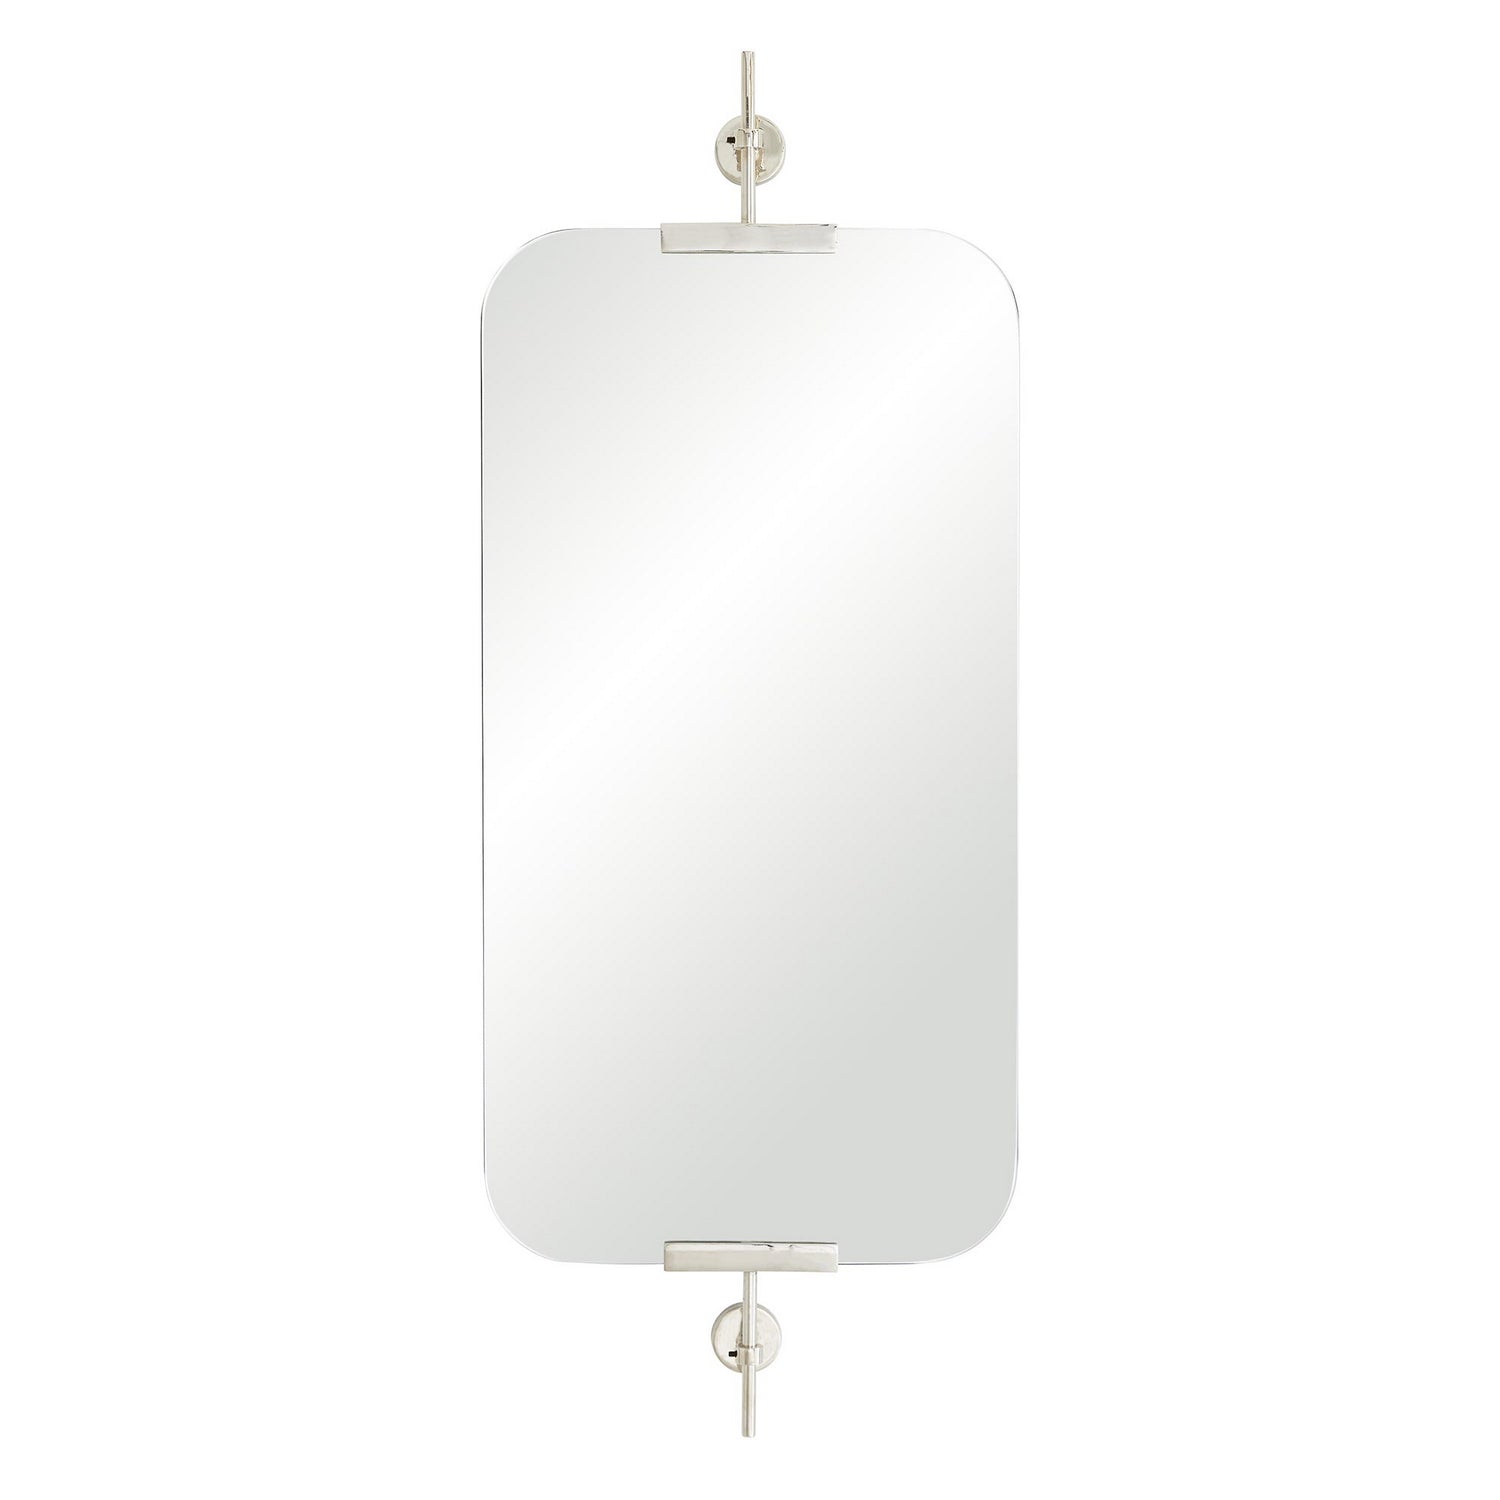 Mirror from the Madden collection in Polished Nickel finish